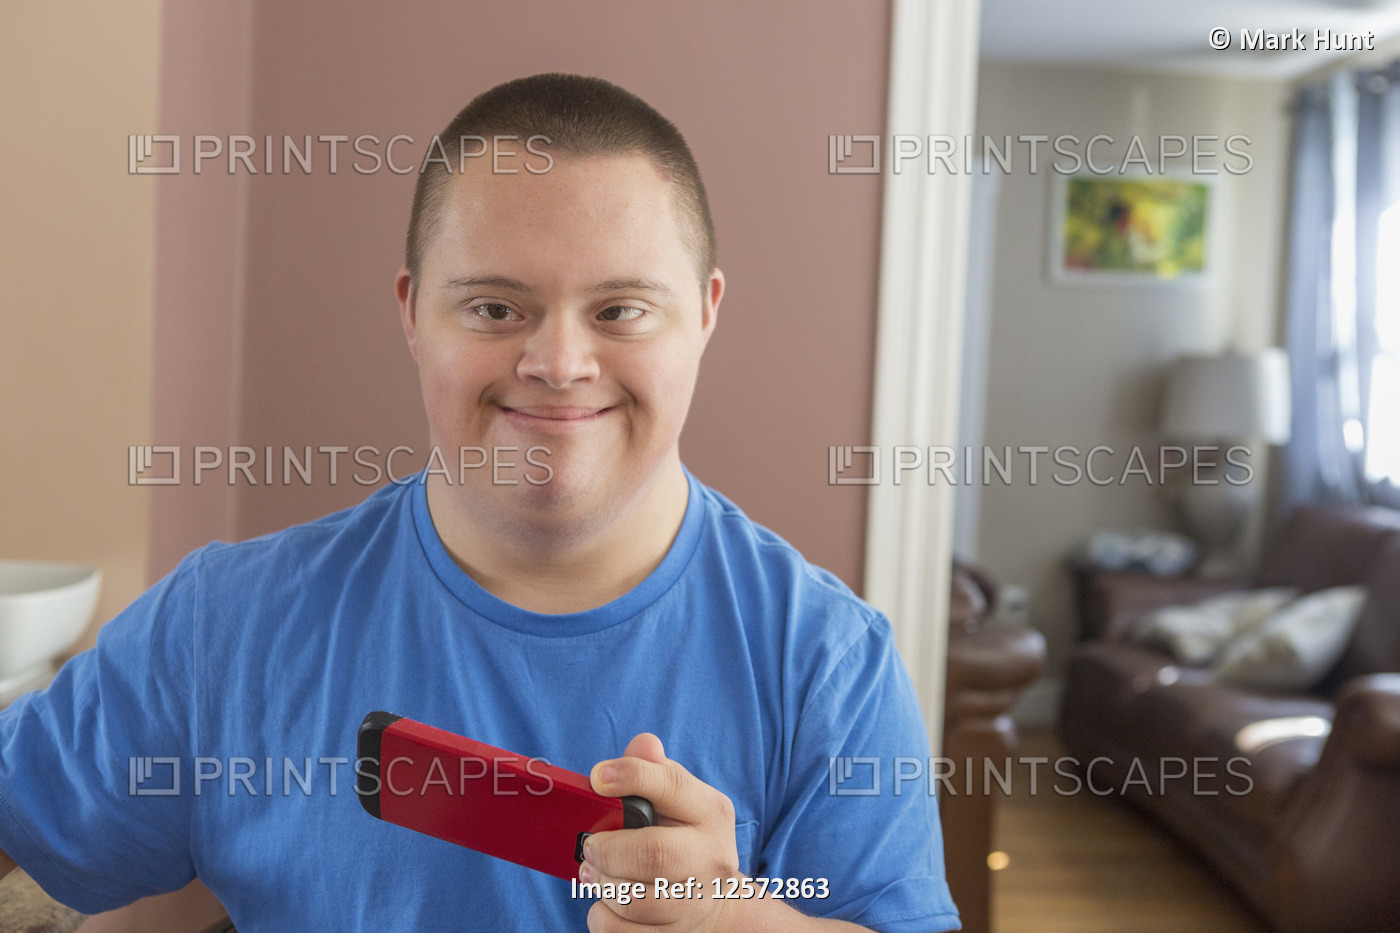 Teen with Down Syndrome holding his phone